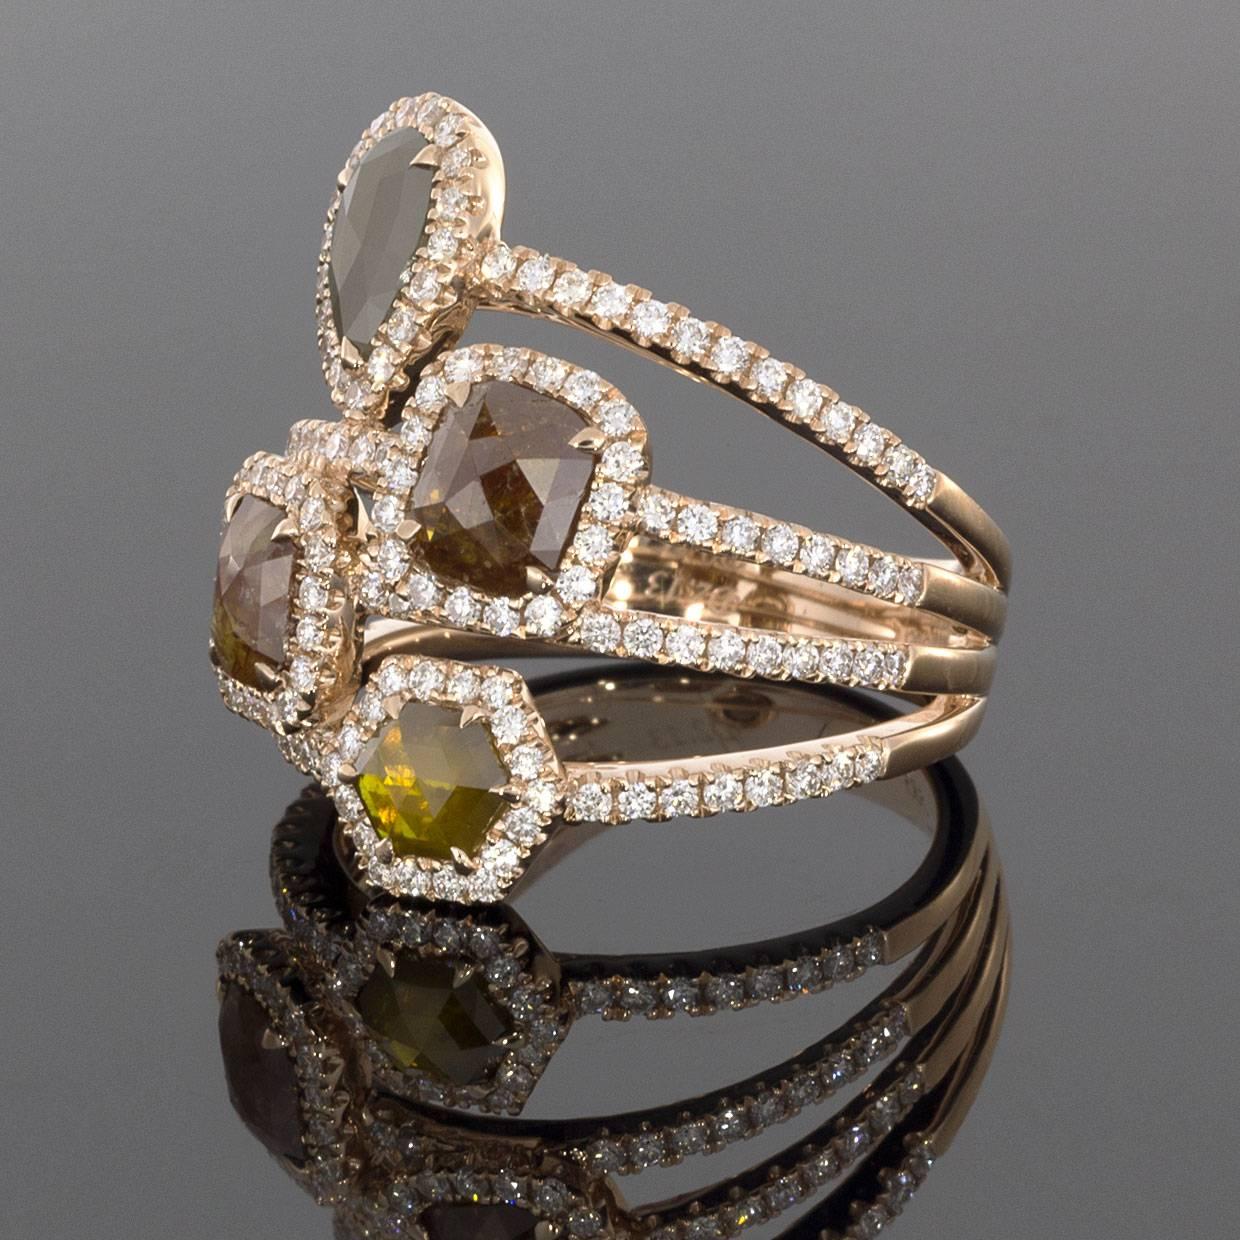 This gorgeous four-stone halo ring is sure to wow!  This ring features four uniquely faceted diamonds in shades of gray, green, red and yellow. Each diamond is surrounded by a halo of white round diamonds. The diamonds have a total weight of 2.99